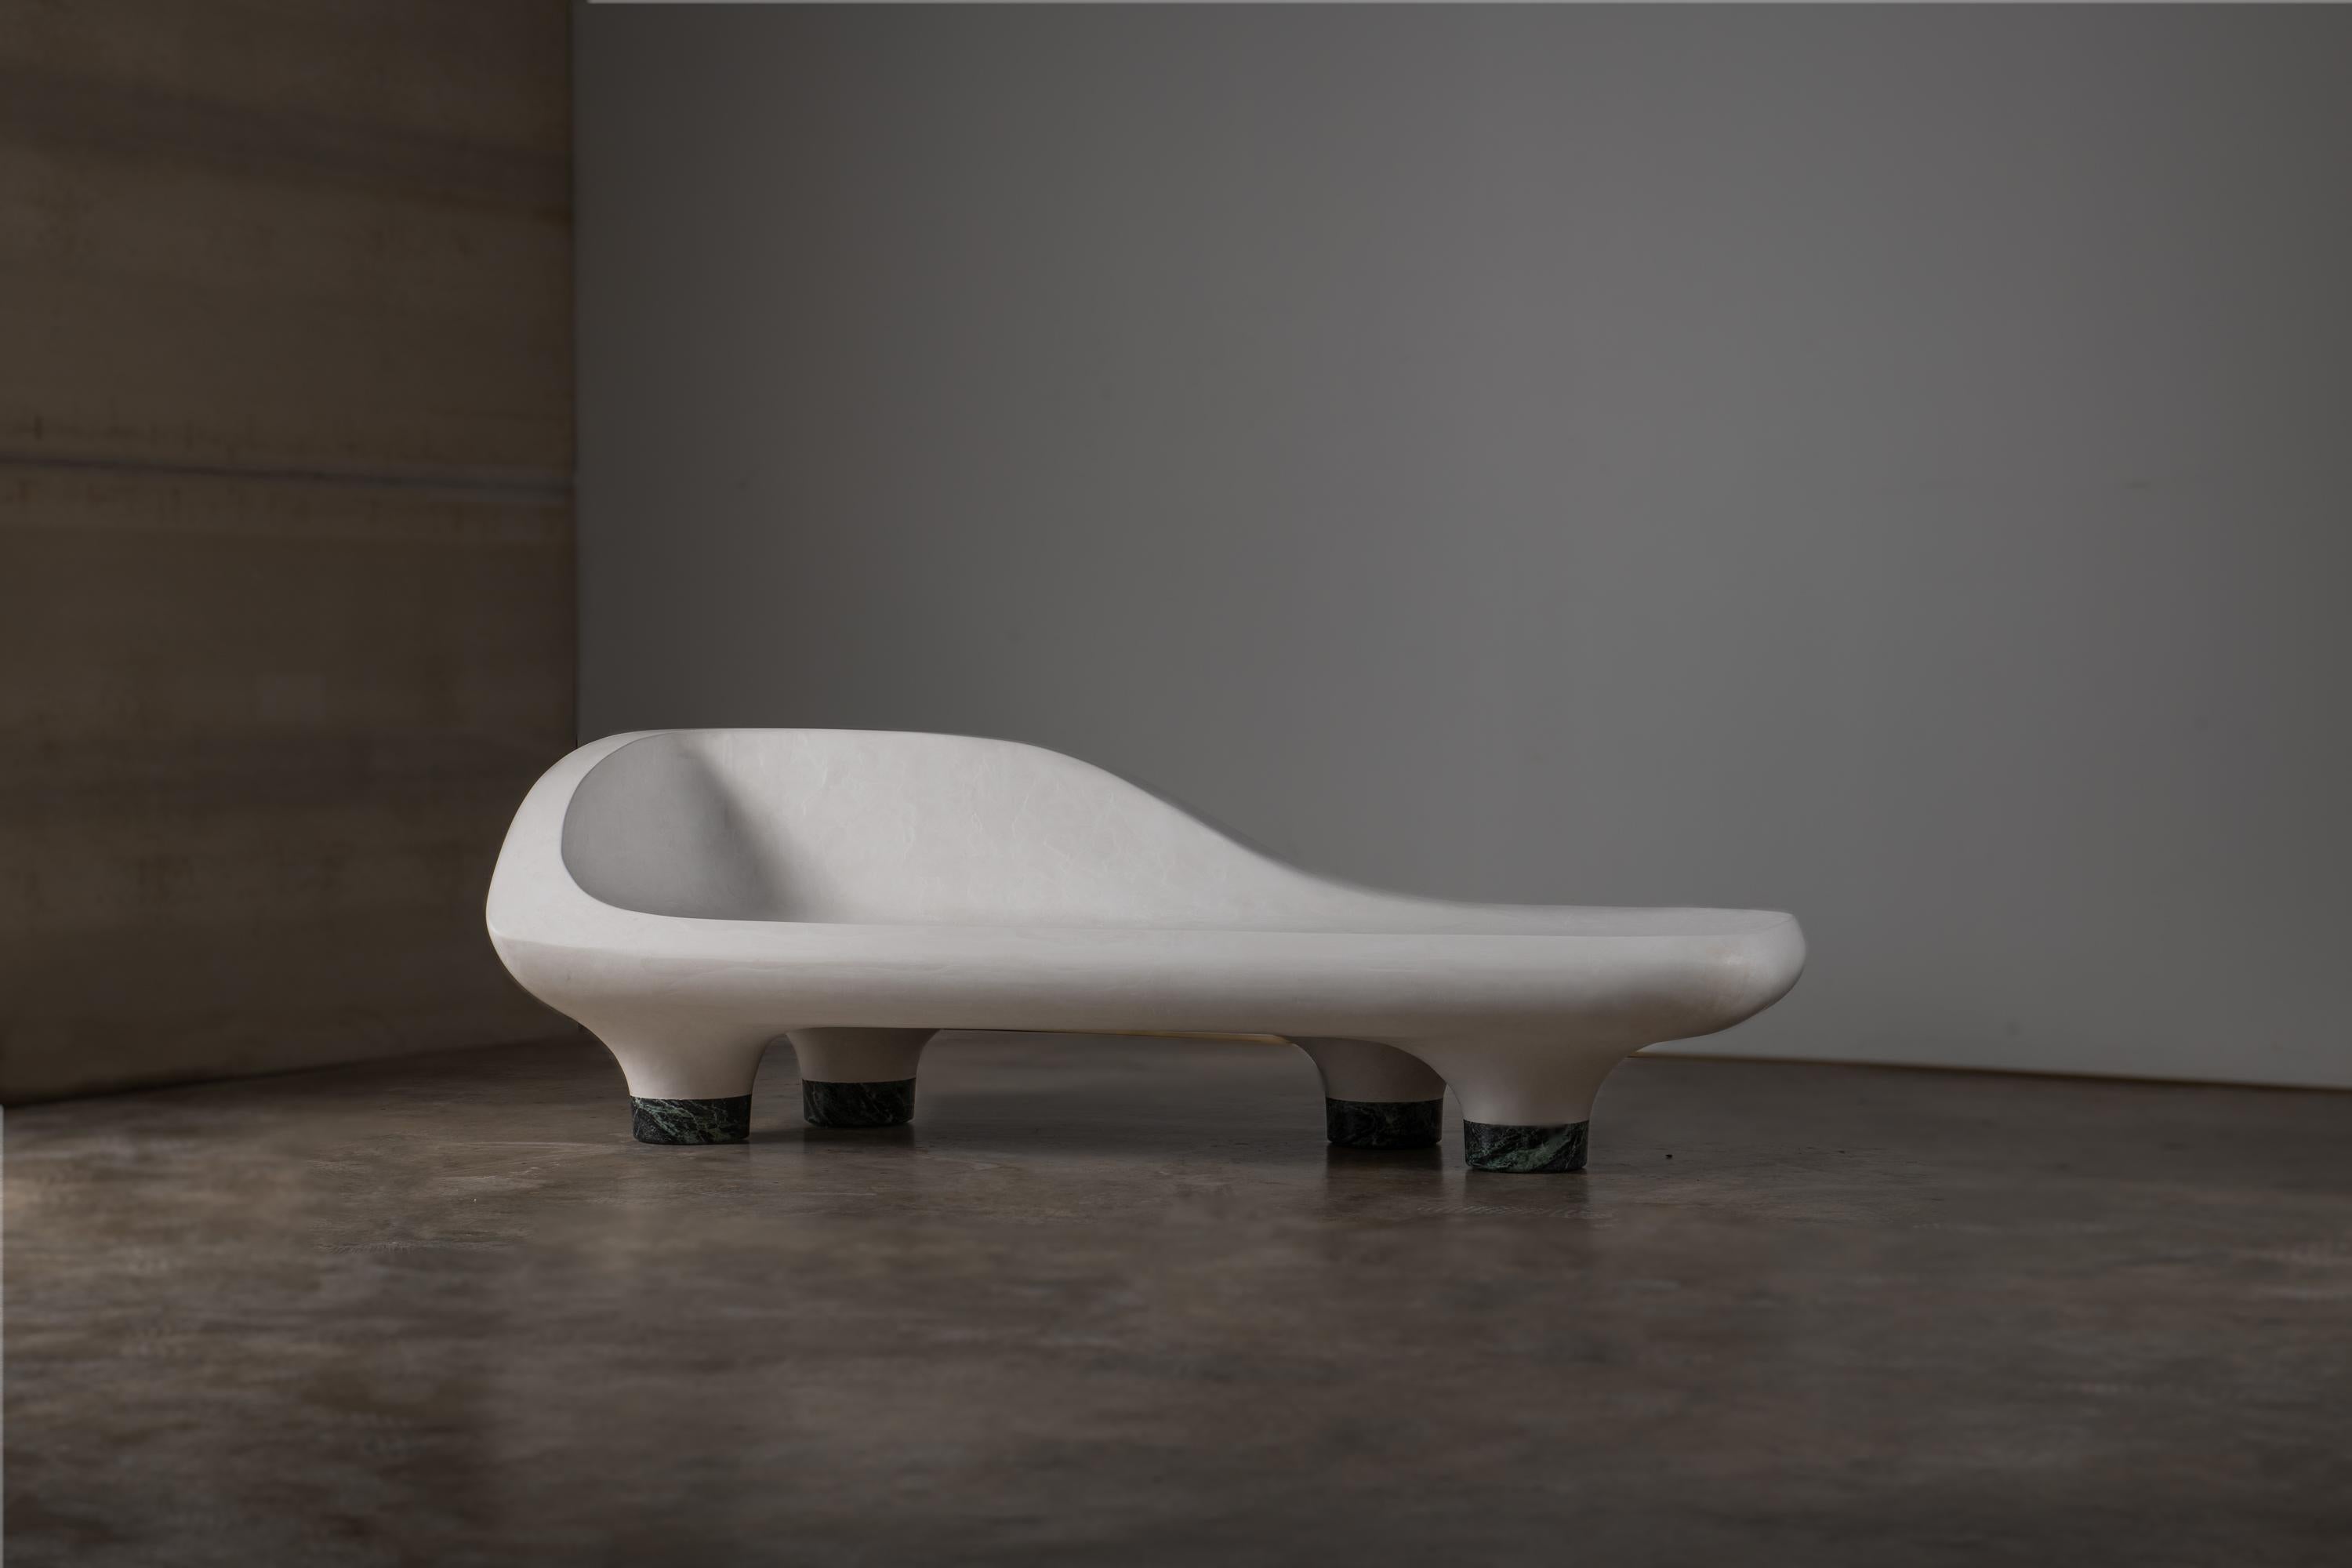 Reynold Rodriguez
Acuestate Y No Jodas Mas Lounge, 2021
Polished gypsum plaster and marble
Measure: 34 x 84 x 25 in.